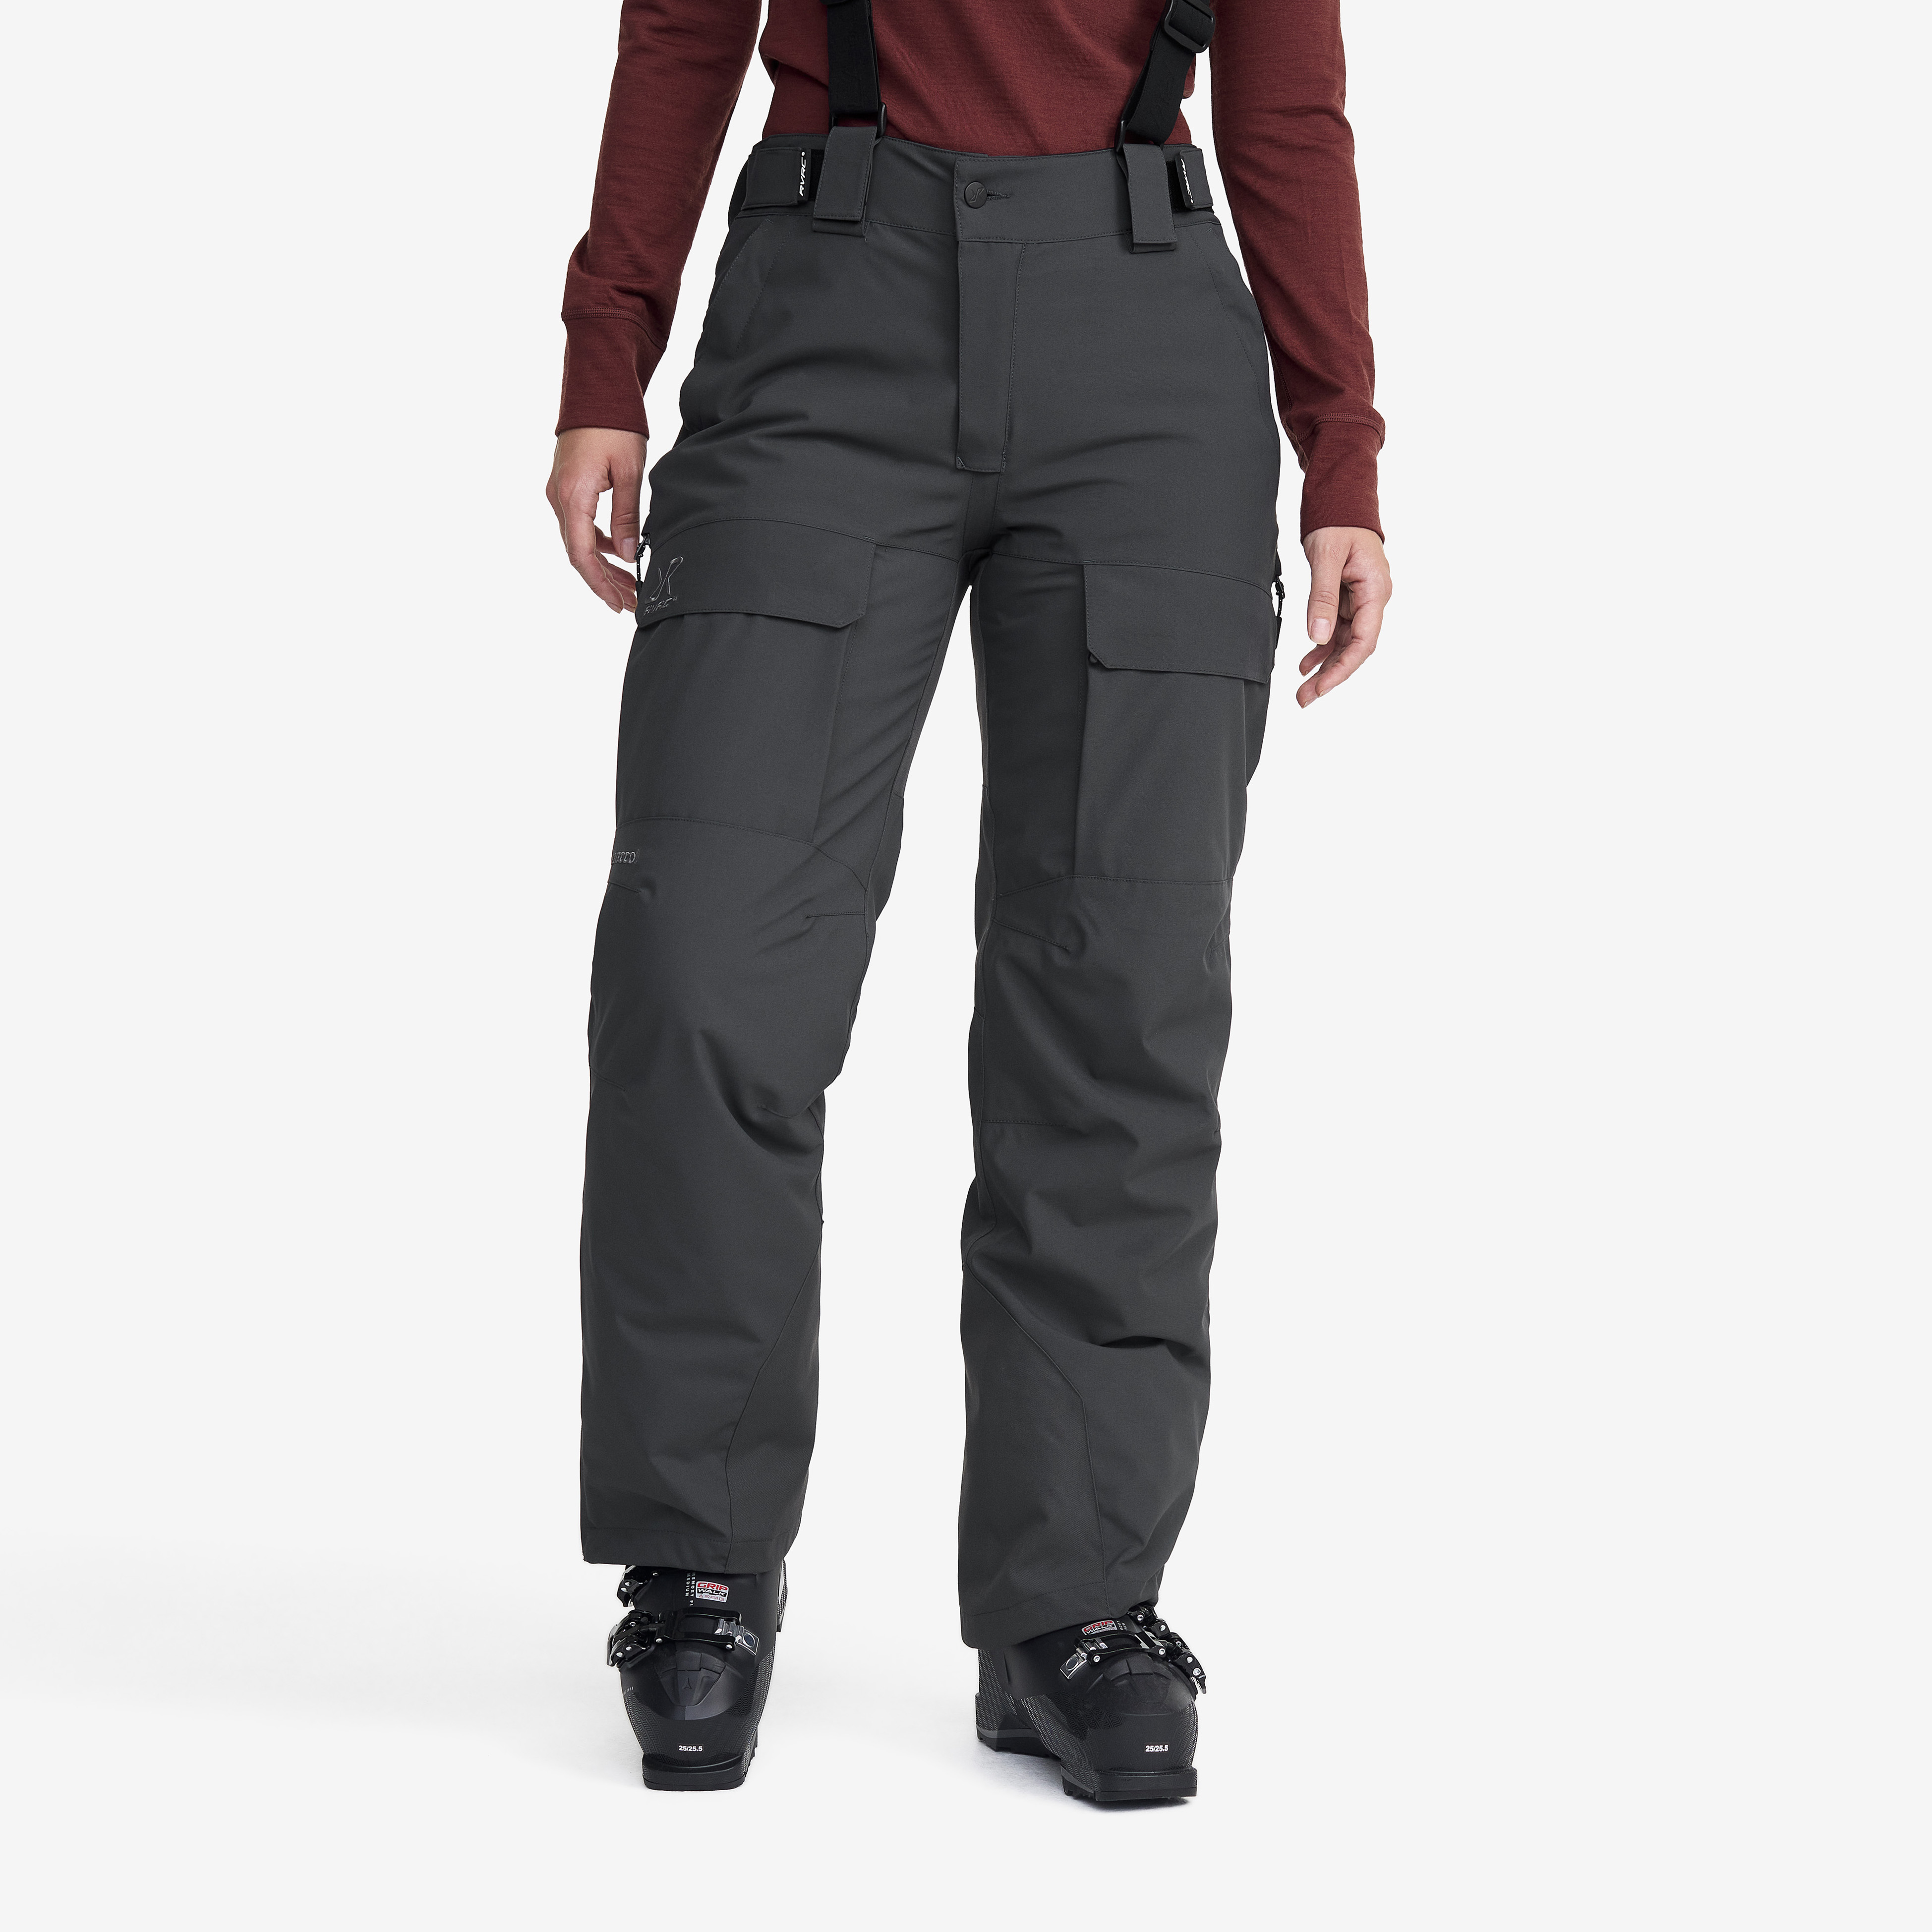 Halo 2L Insulated Ski Pants Anthracite Women